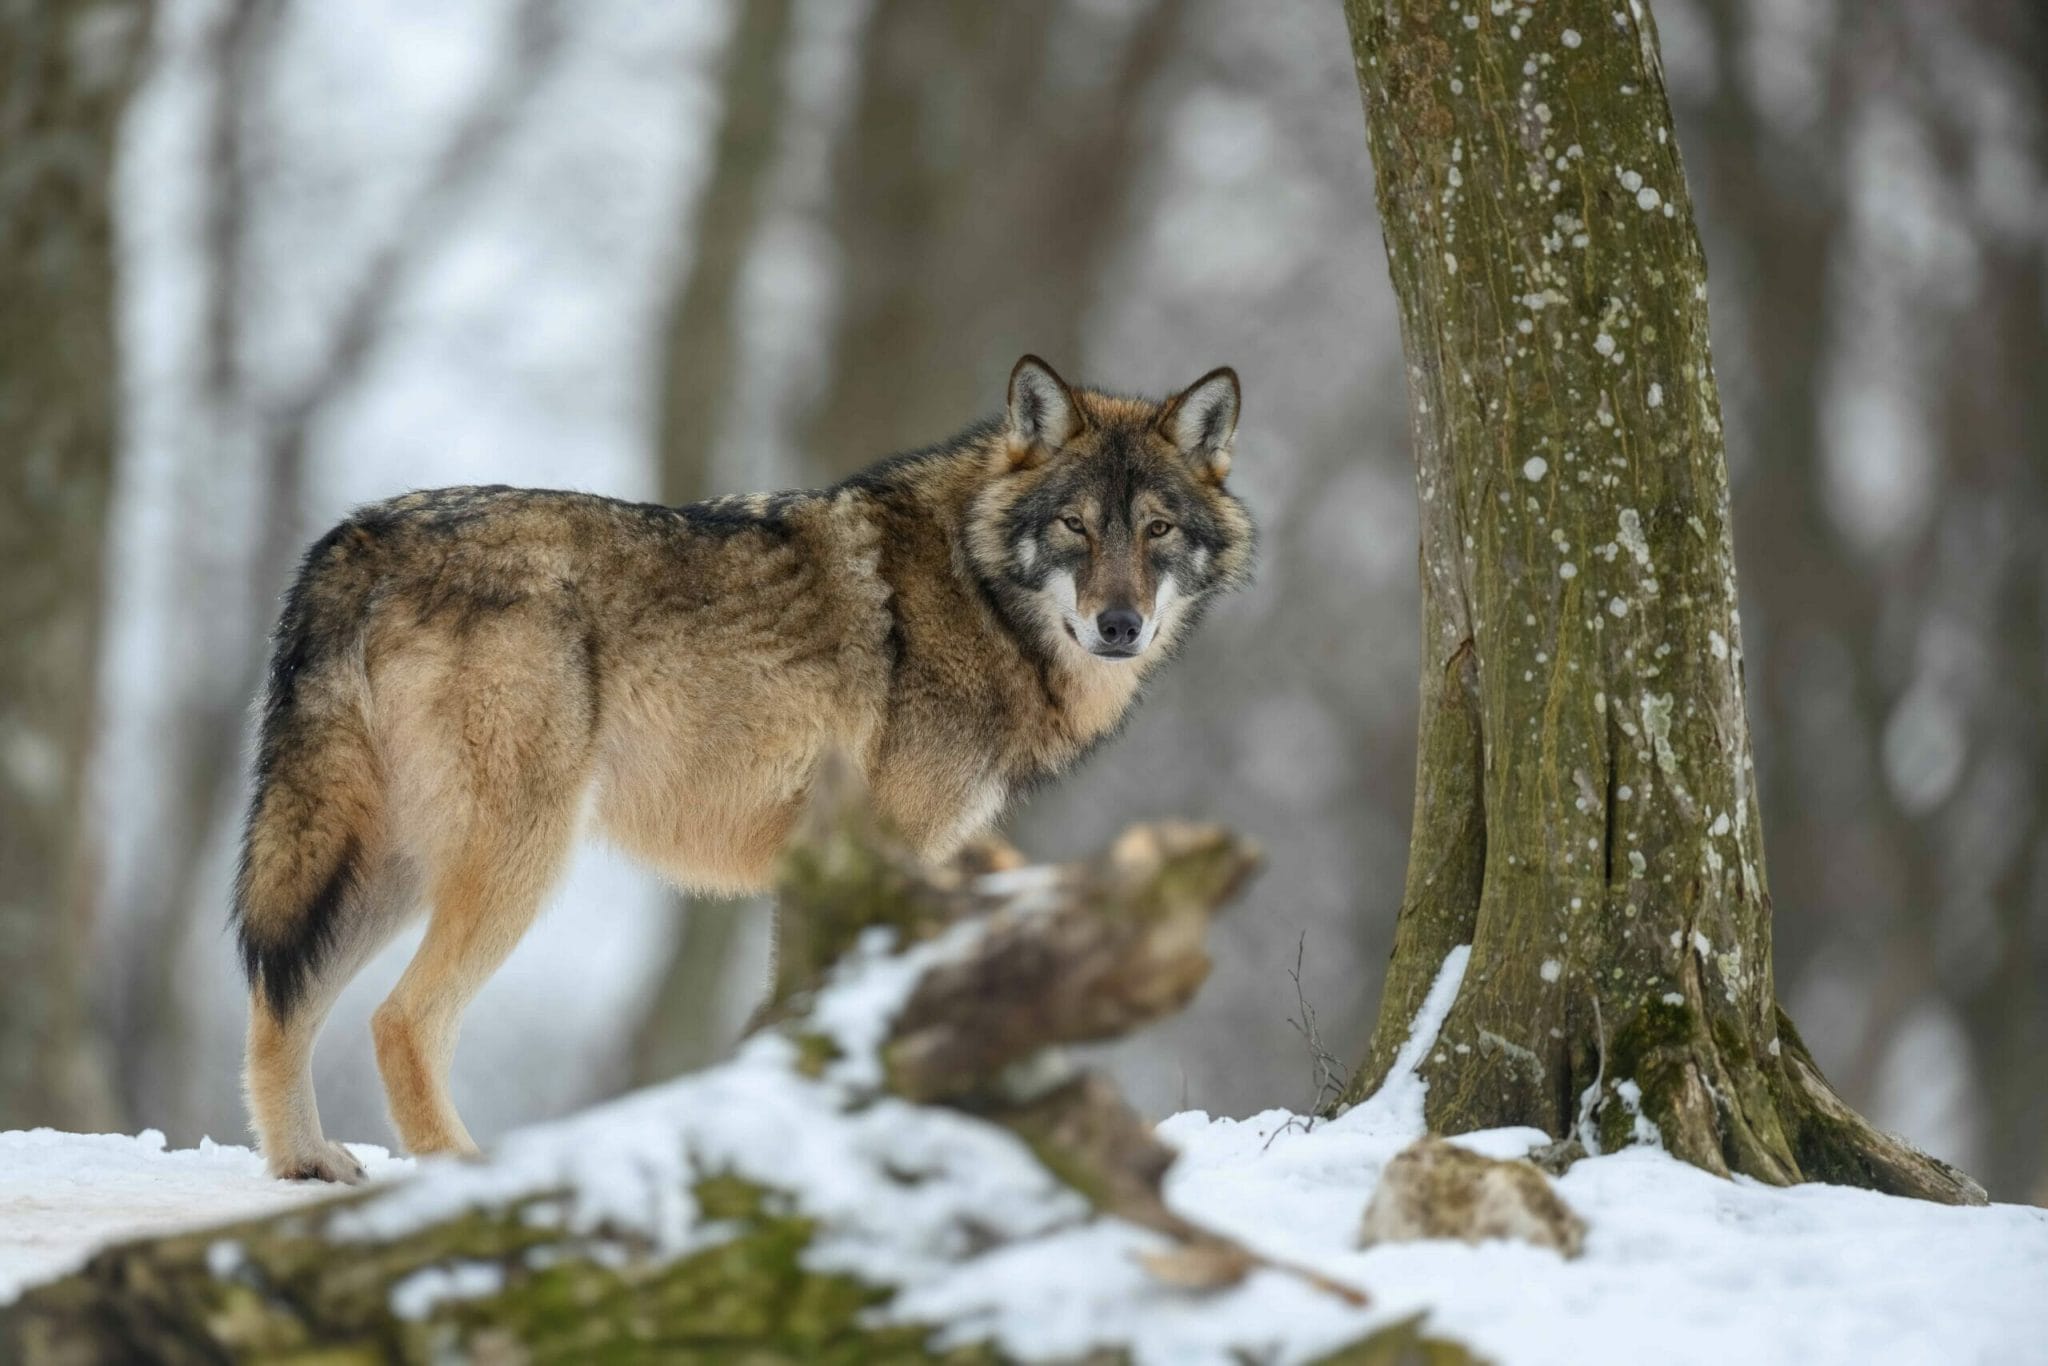 Despite their size, wolves are shy and timid creatures